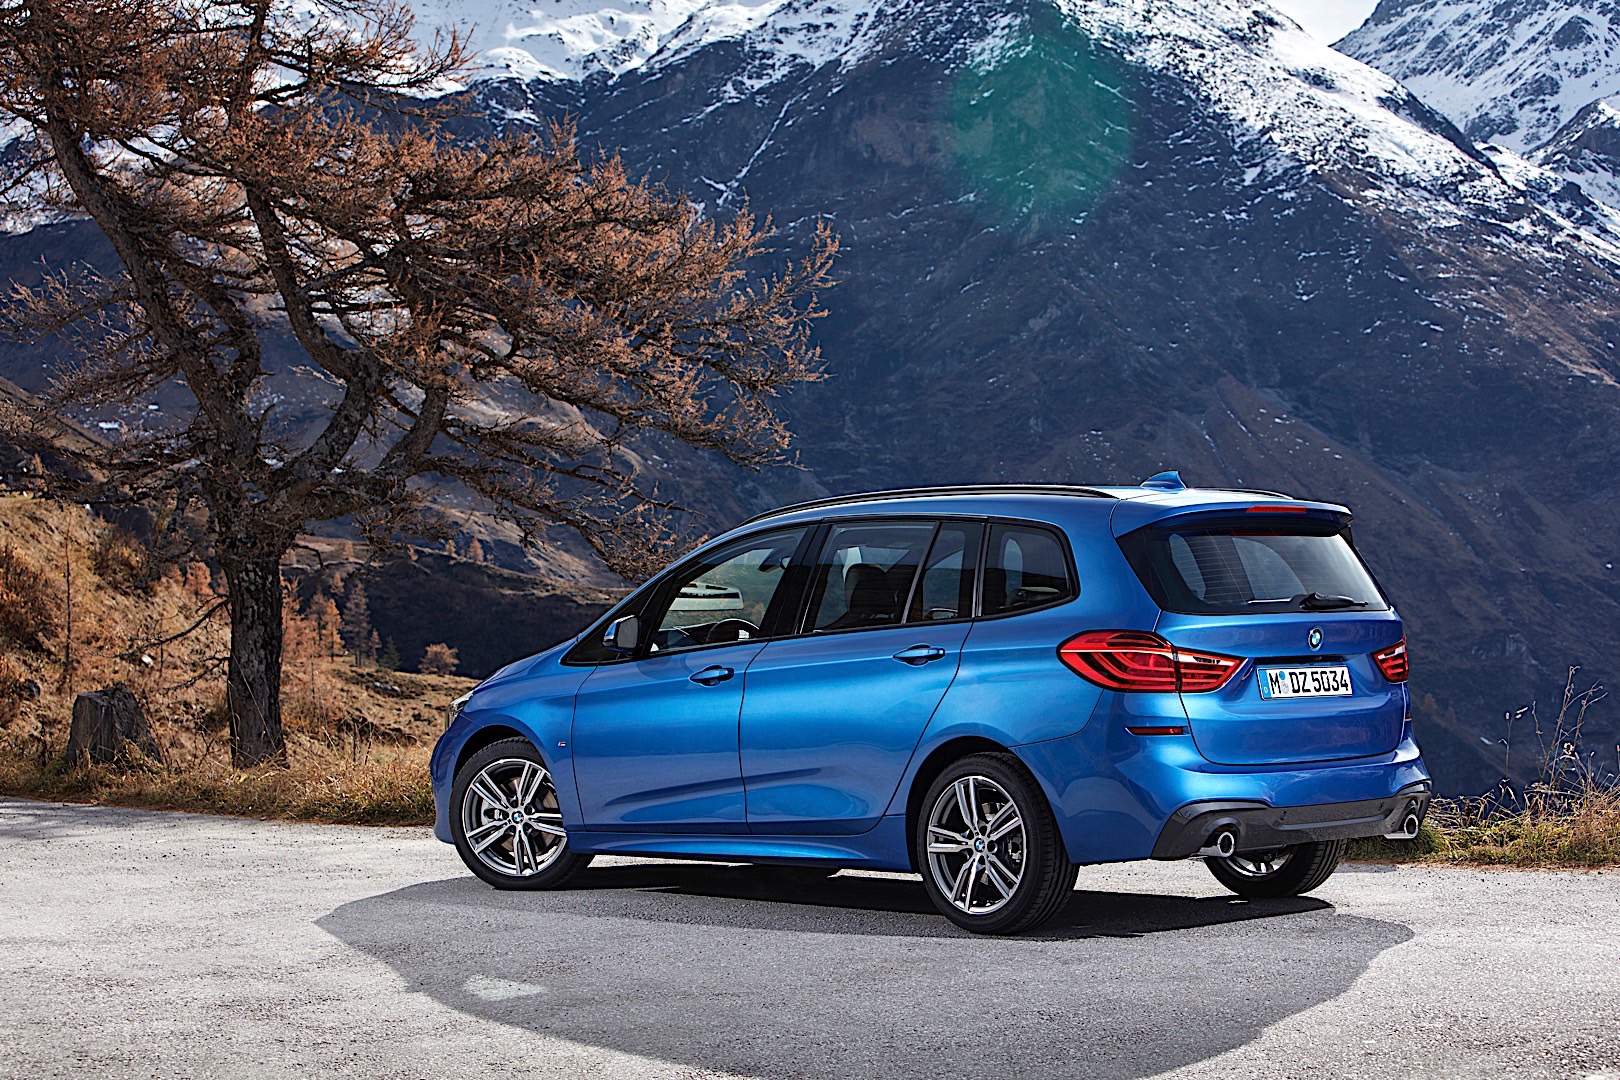 Report: BMW MPV Models Will Be Discontinued